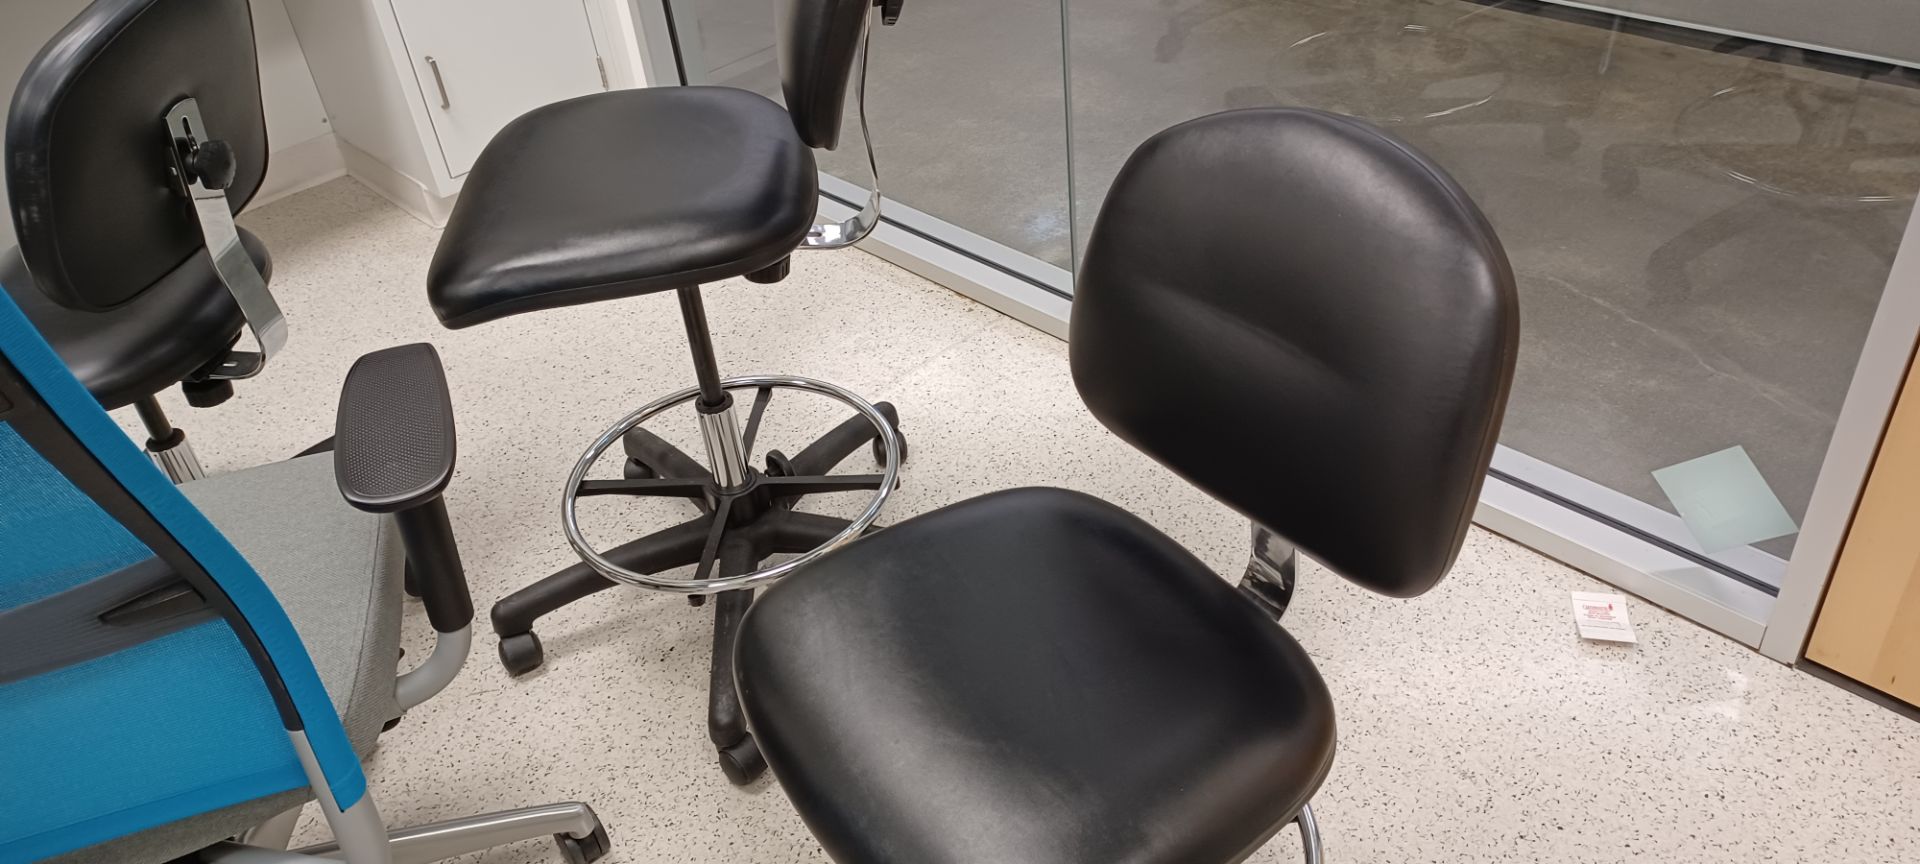 LOT OF 5 LAB CHAIRS - Image 3 of 3